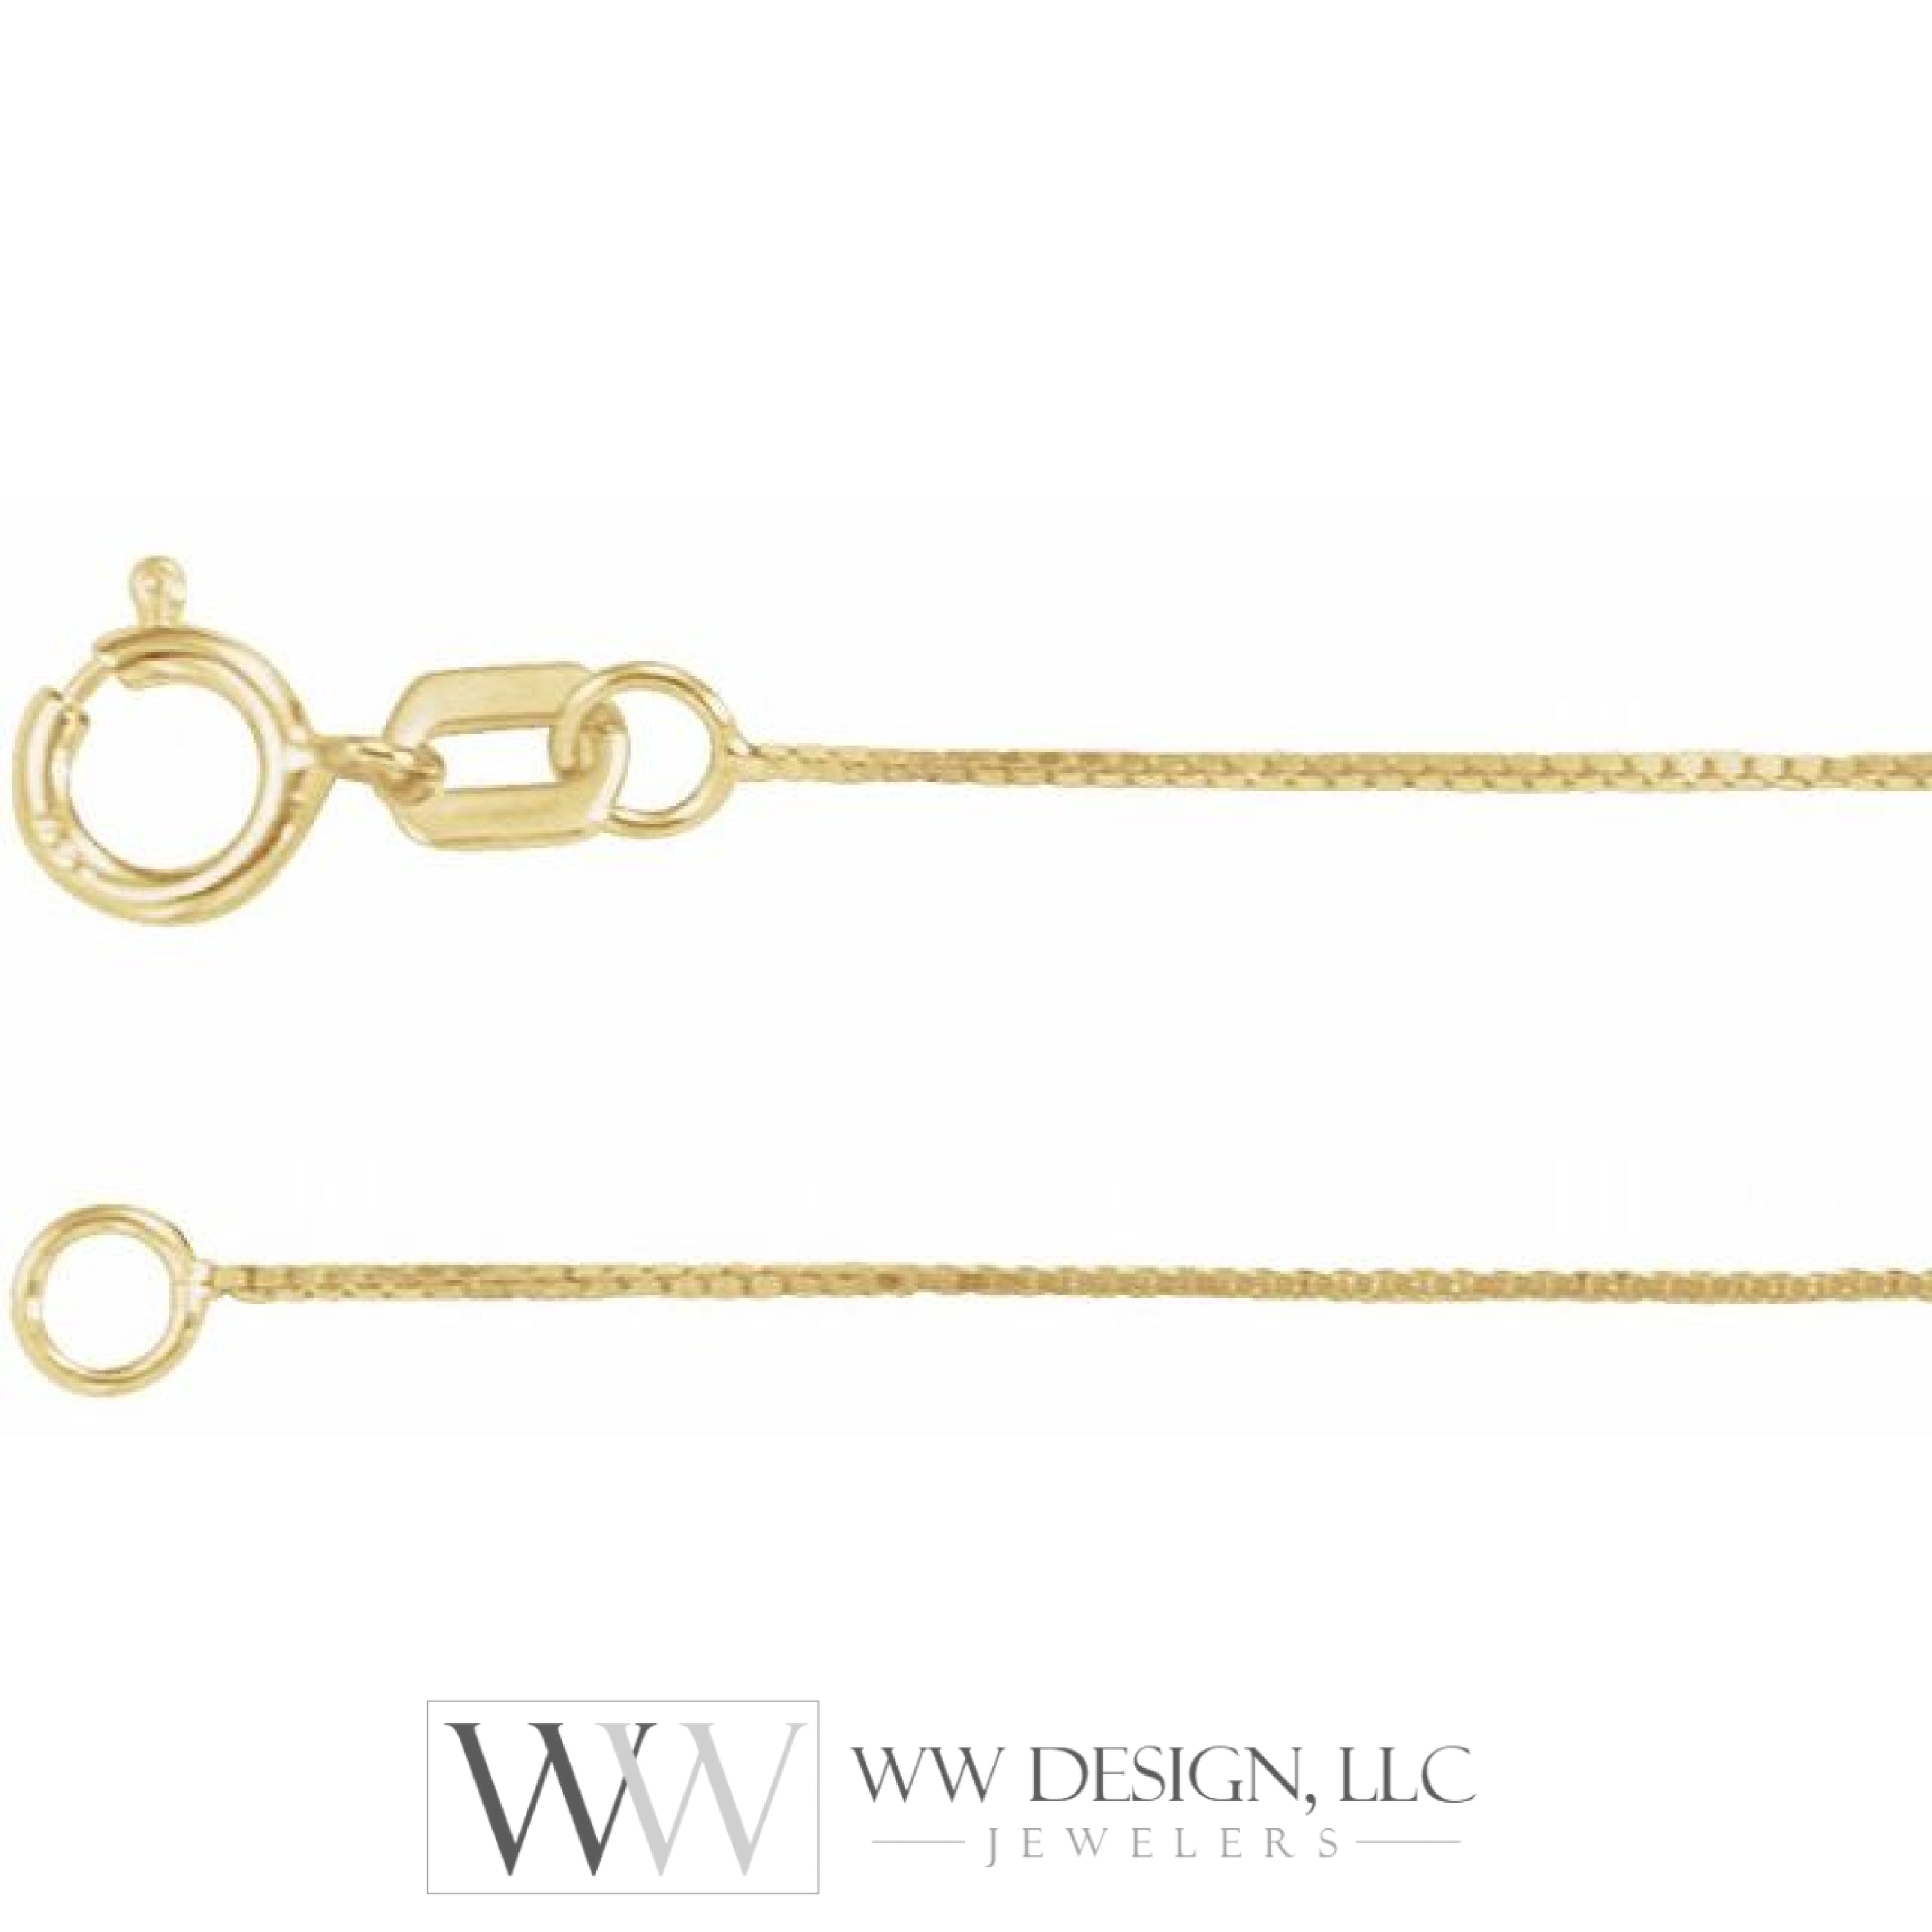 0.55mm Box Chain Bracelet or Necklace - 14k Gold (Y, R, W), or Sterling Silver